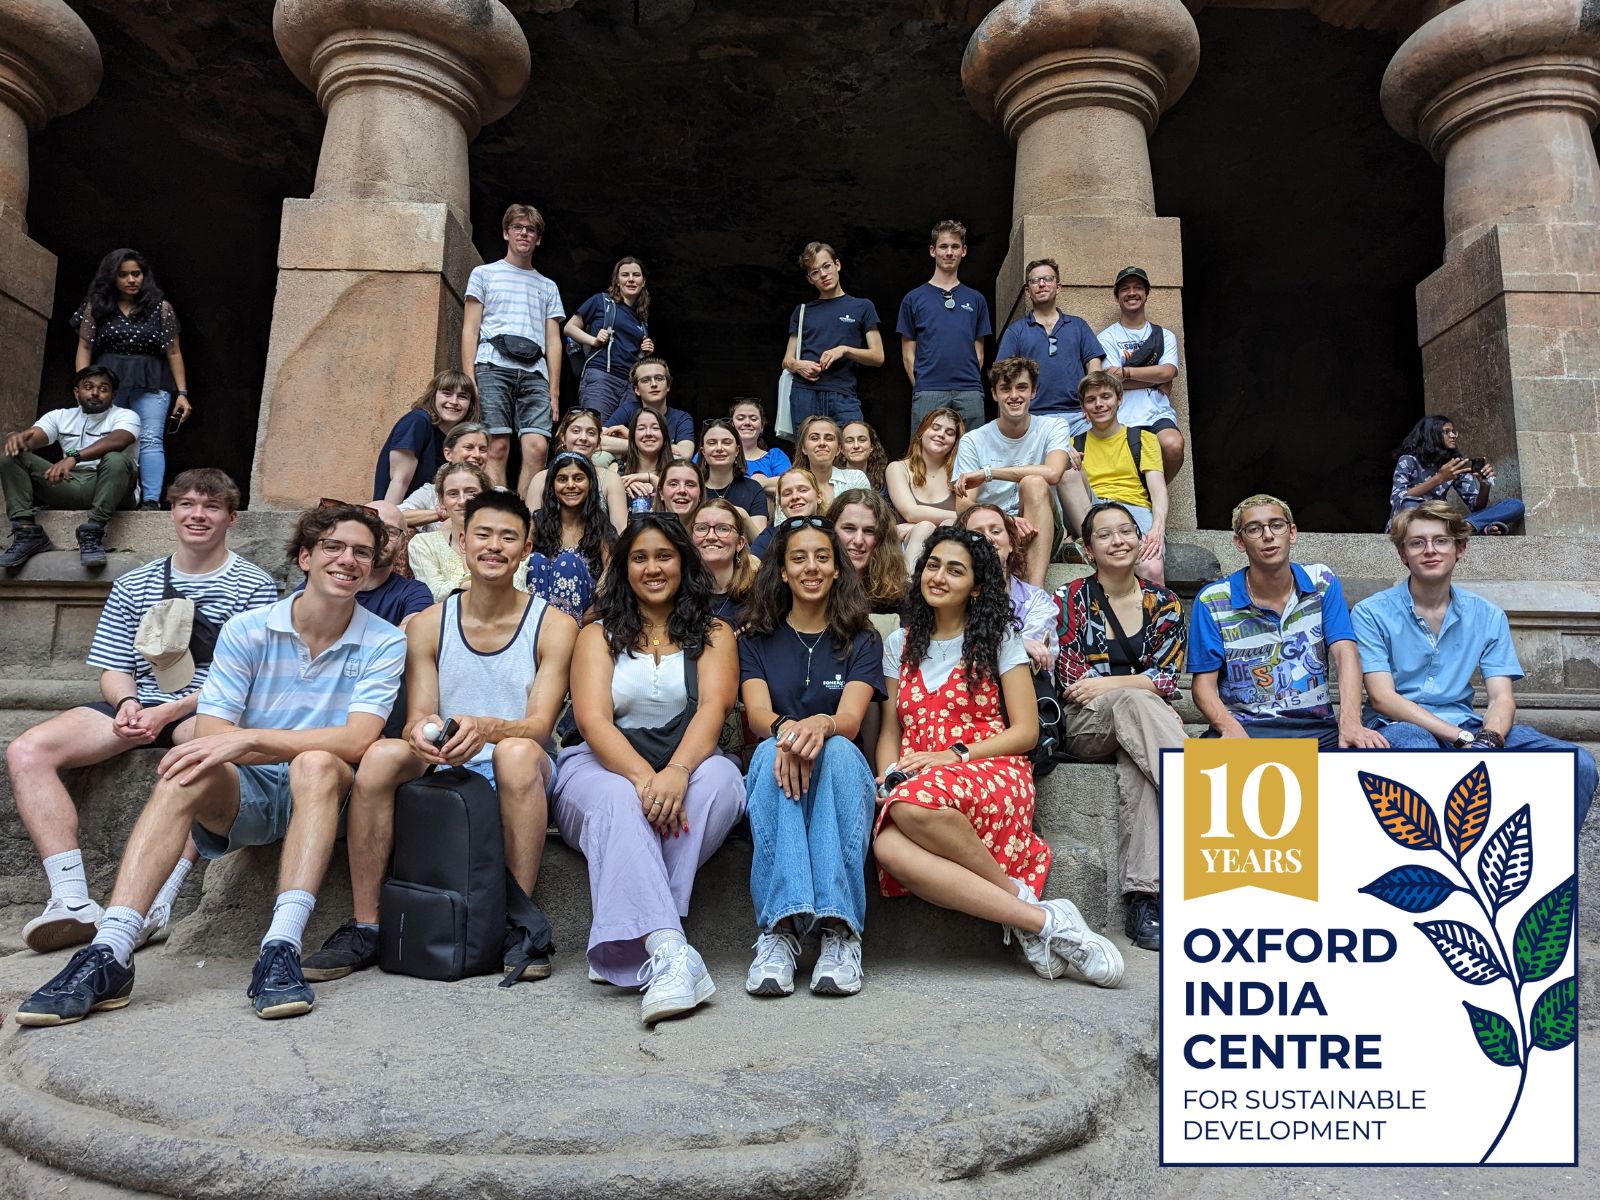 The Choir's trip celebrated the 10th anniversary of the Oxford India Centre for Sustainable Development